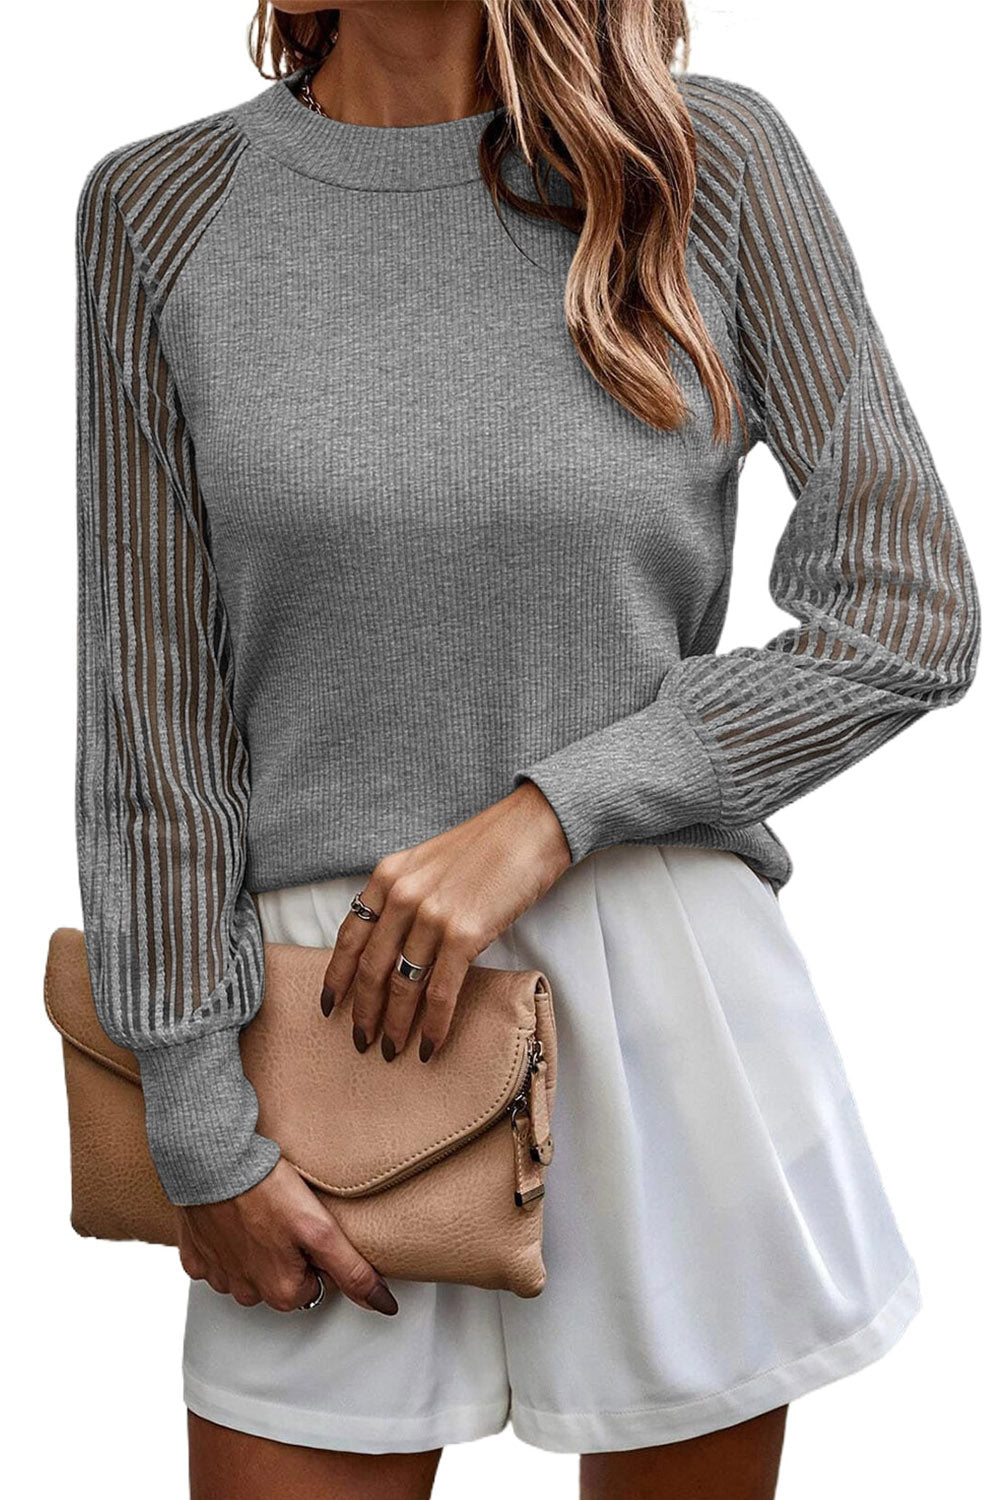 Mesh Long Sleeve Crewneck Ribbed Top - 3 colors to choose from - women's shirt at TFC&H Co.